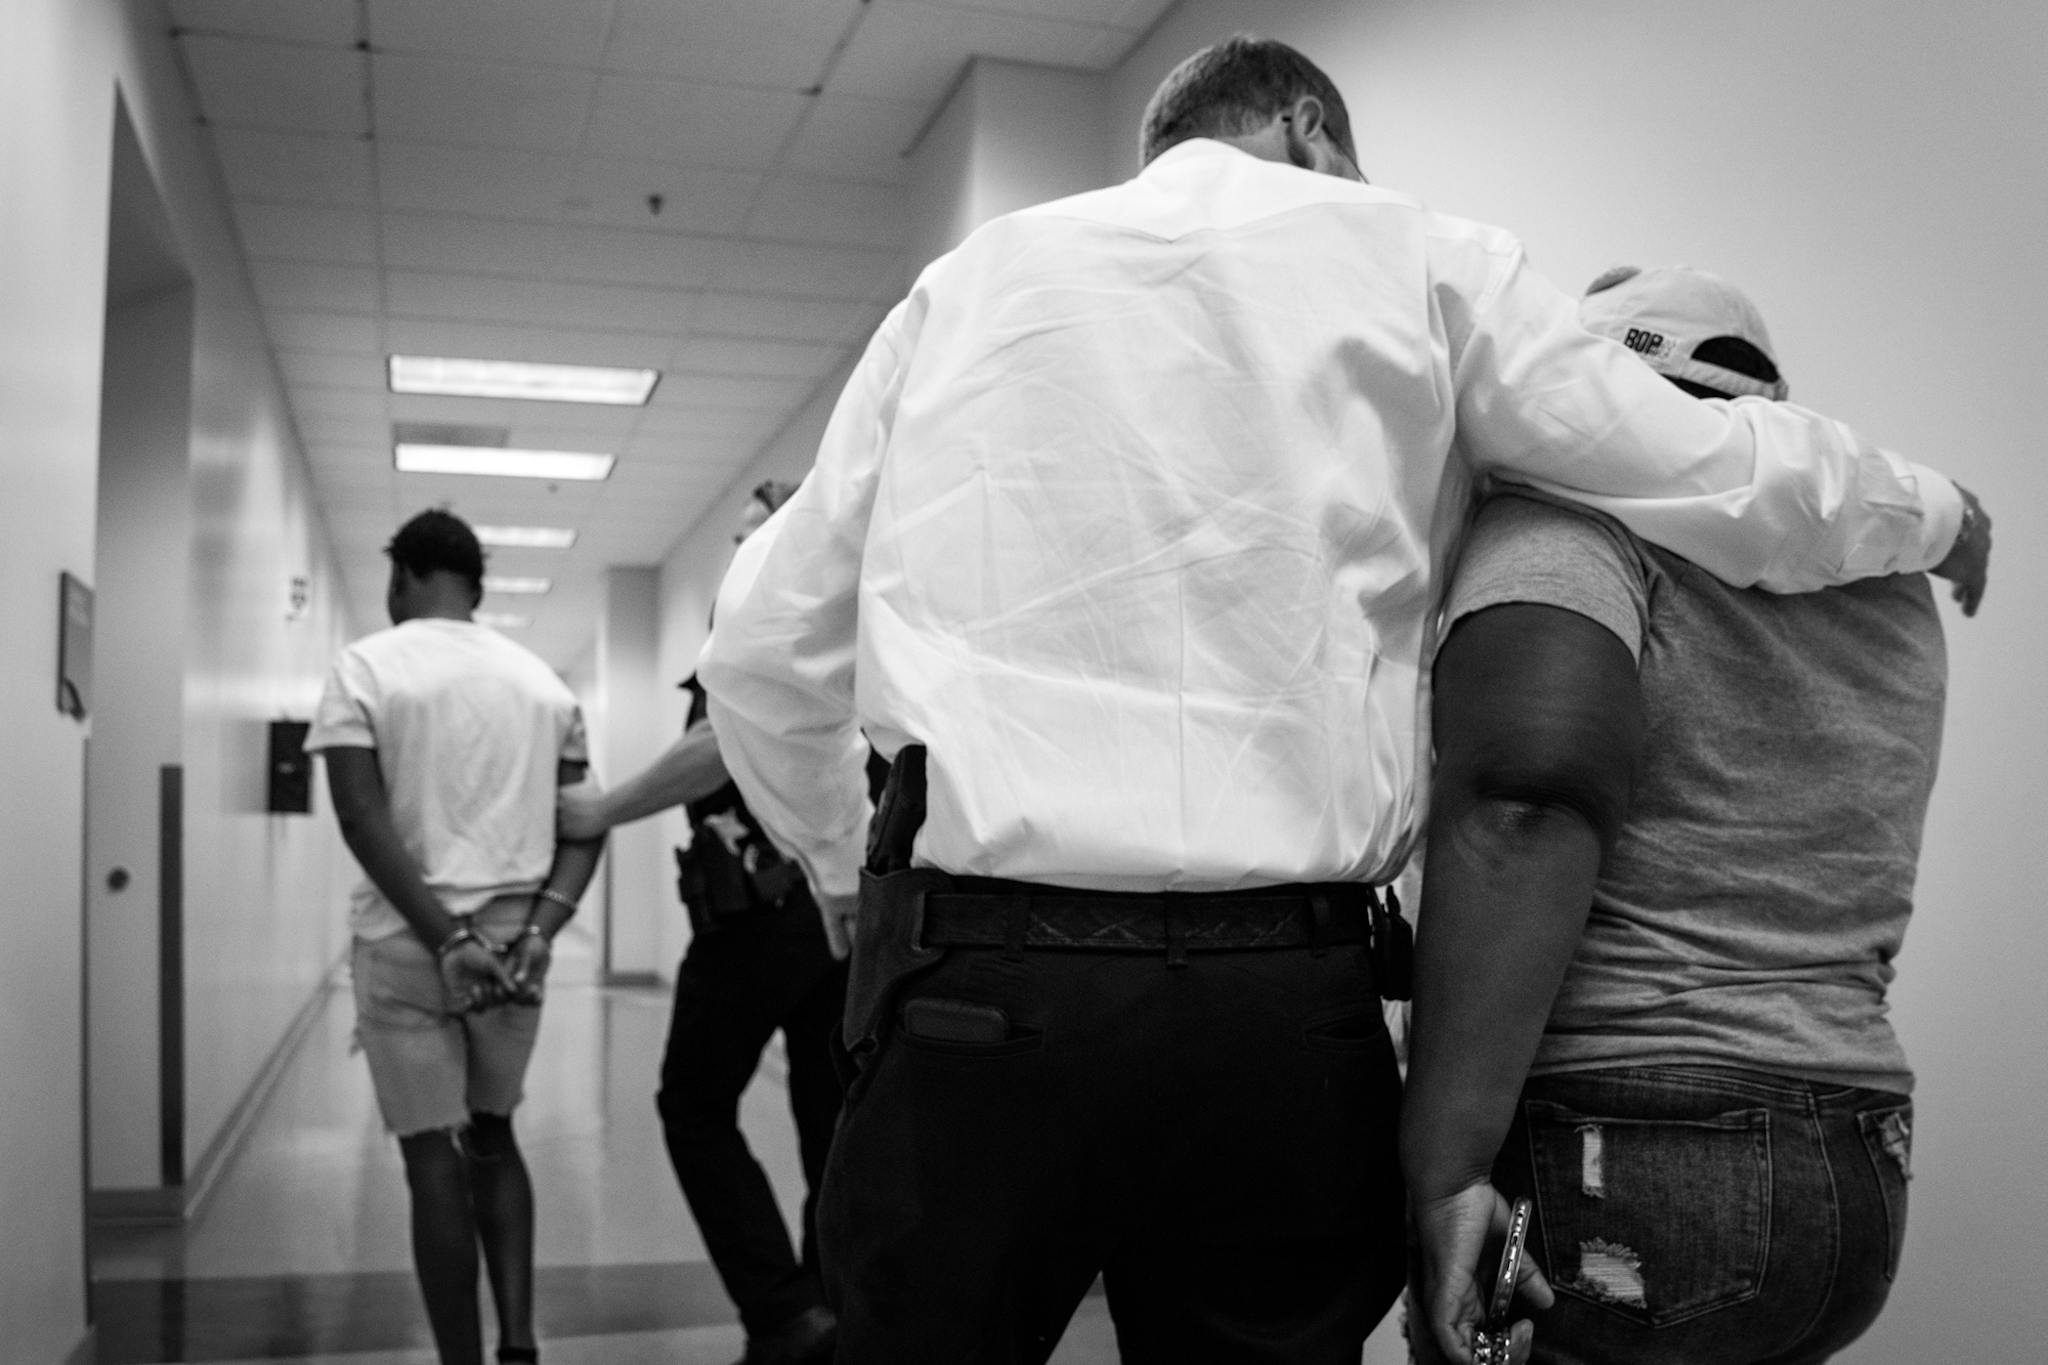 Curtis comforting a mother as her juvenile son is arrested for suspected homicide